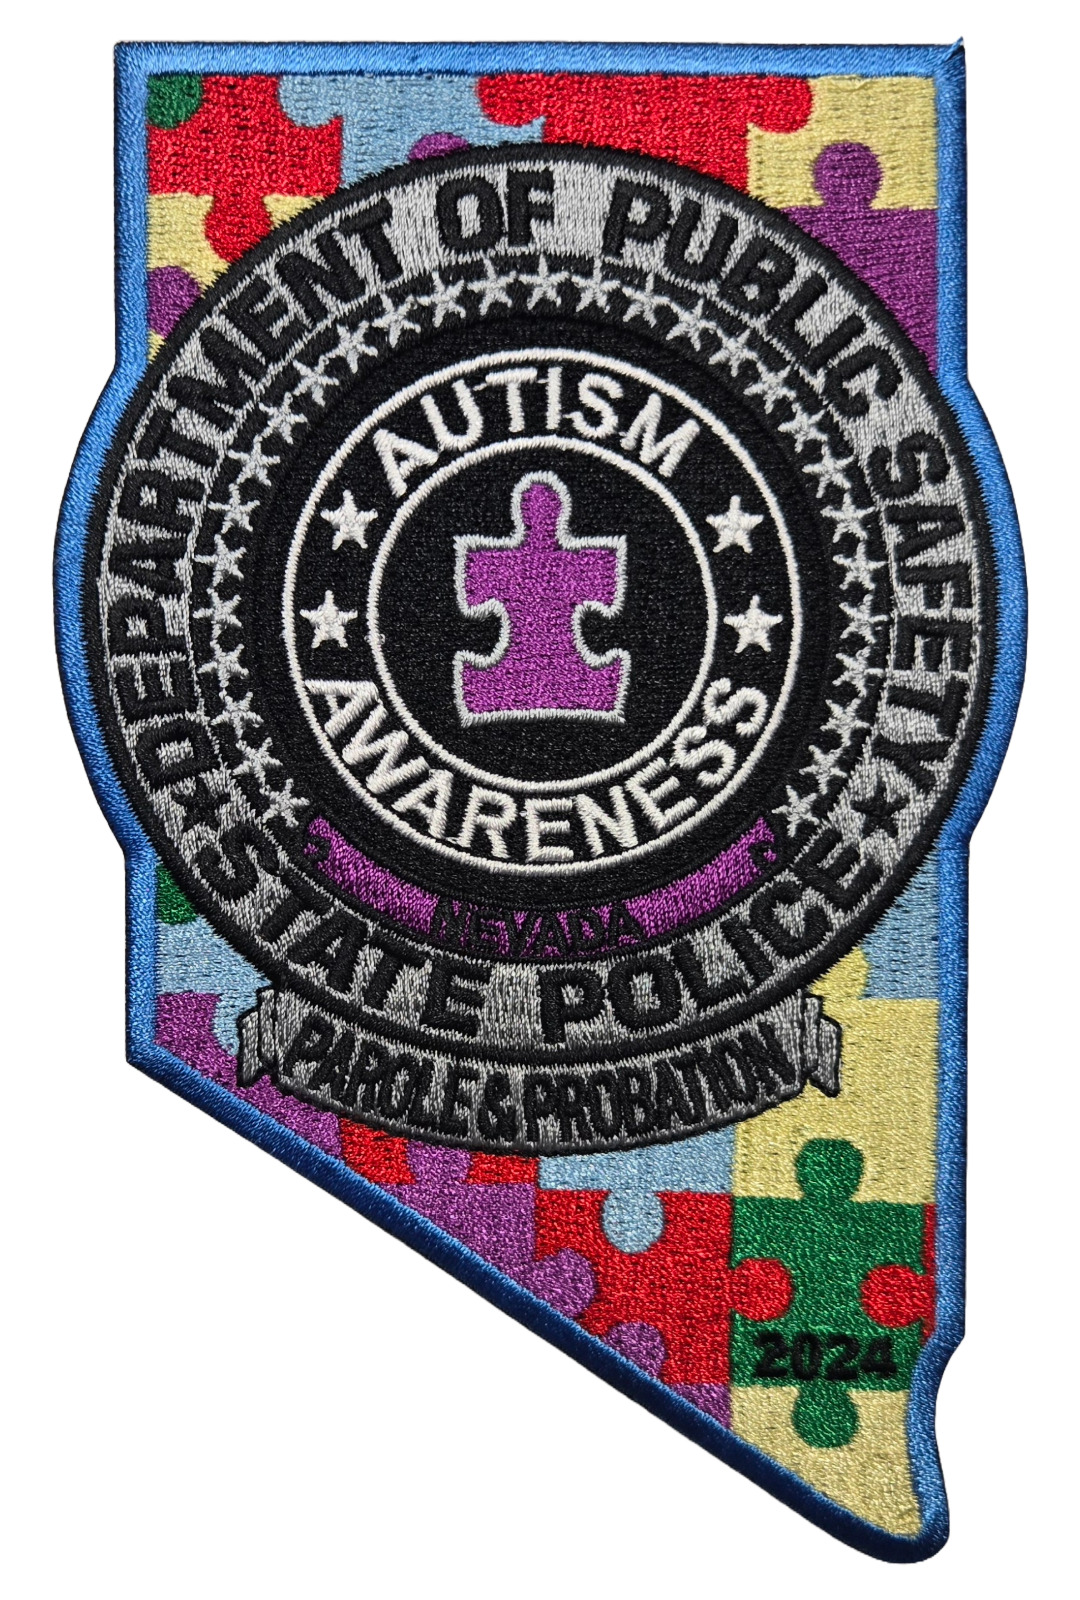 Nevada State Police - Parole and Probation Autism Awareness Patch